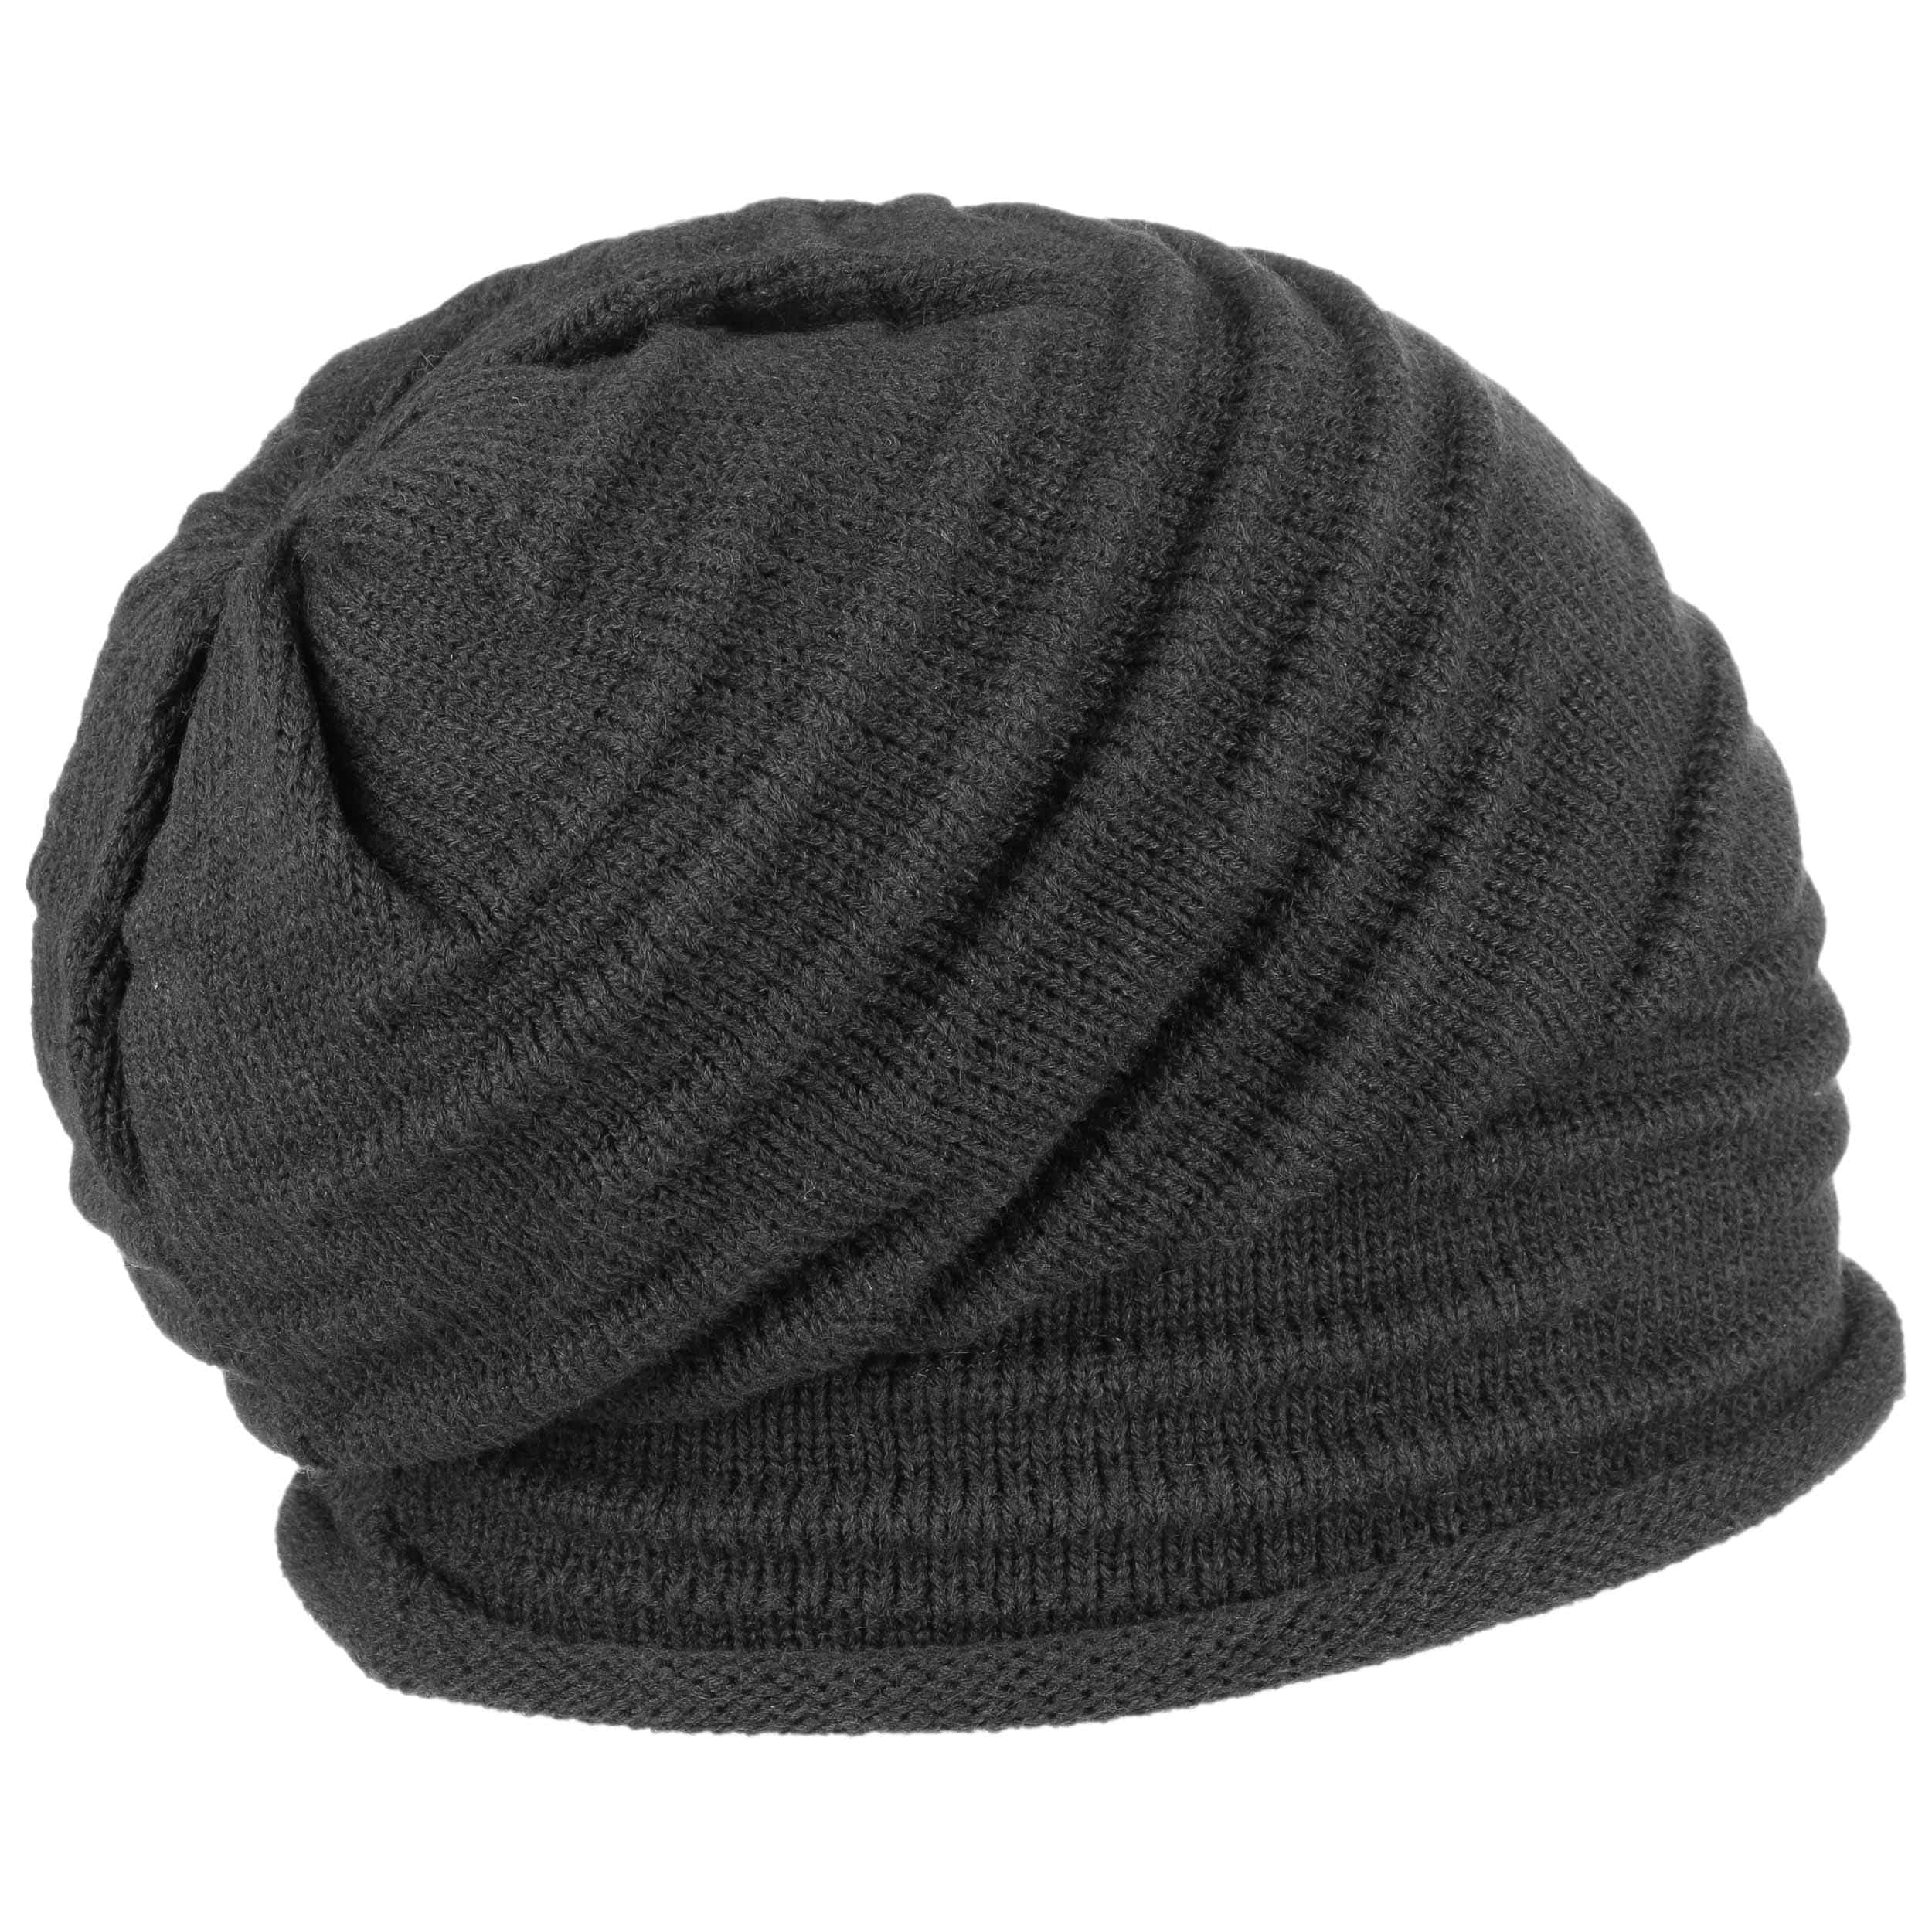 Aarony Long Beanie by Chillouts € - 19,95 Strickmütze